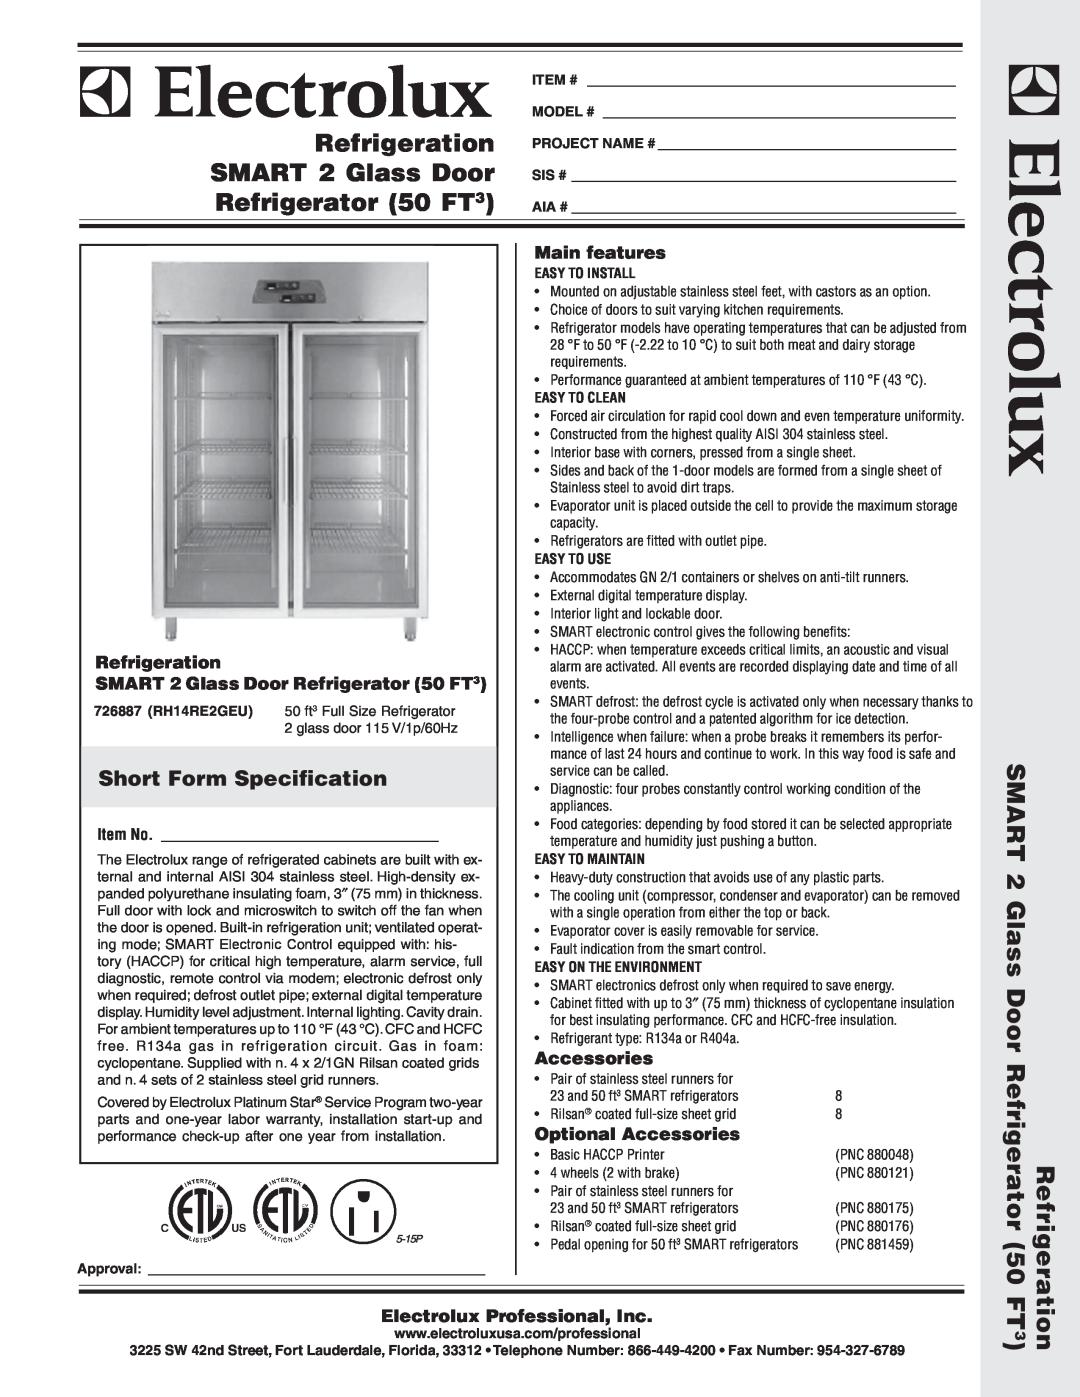 Electrolux RH14RE2GEU, 726887 warranty Short Form Specification, Main features, Refrigeration, Optional Accessories 